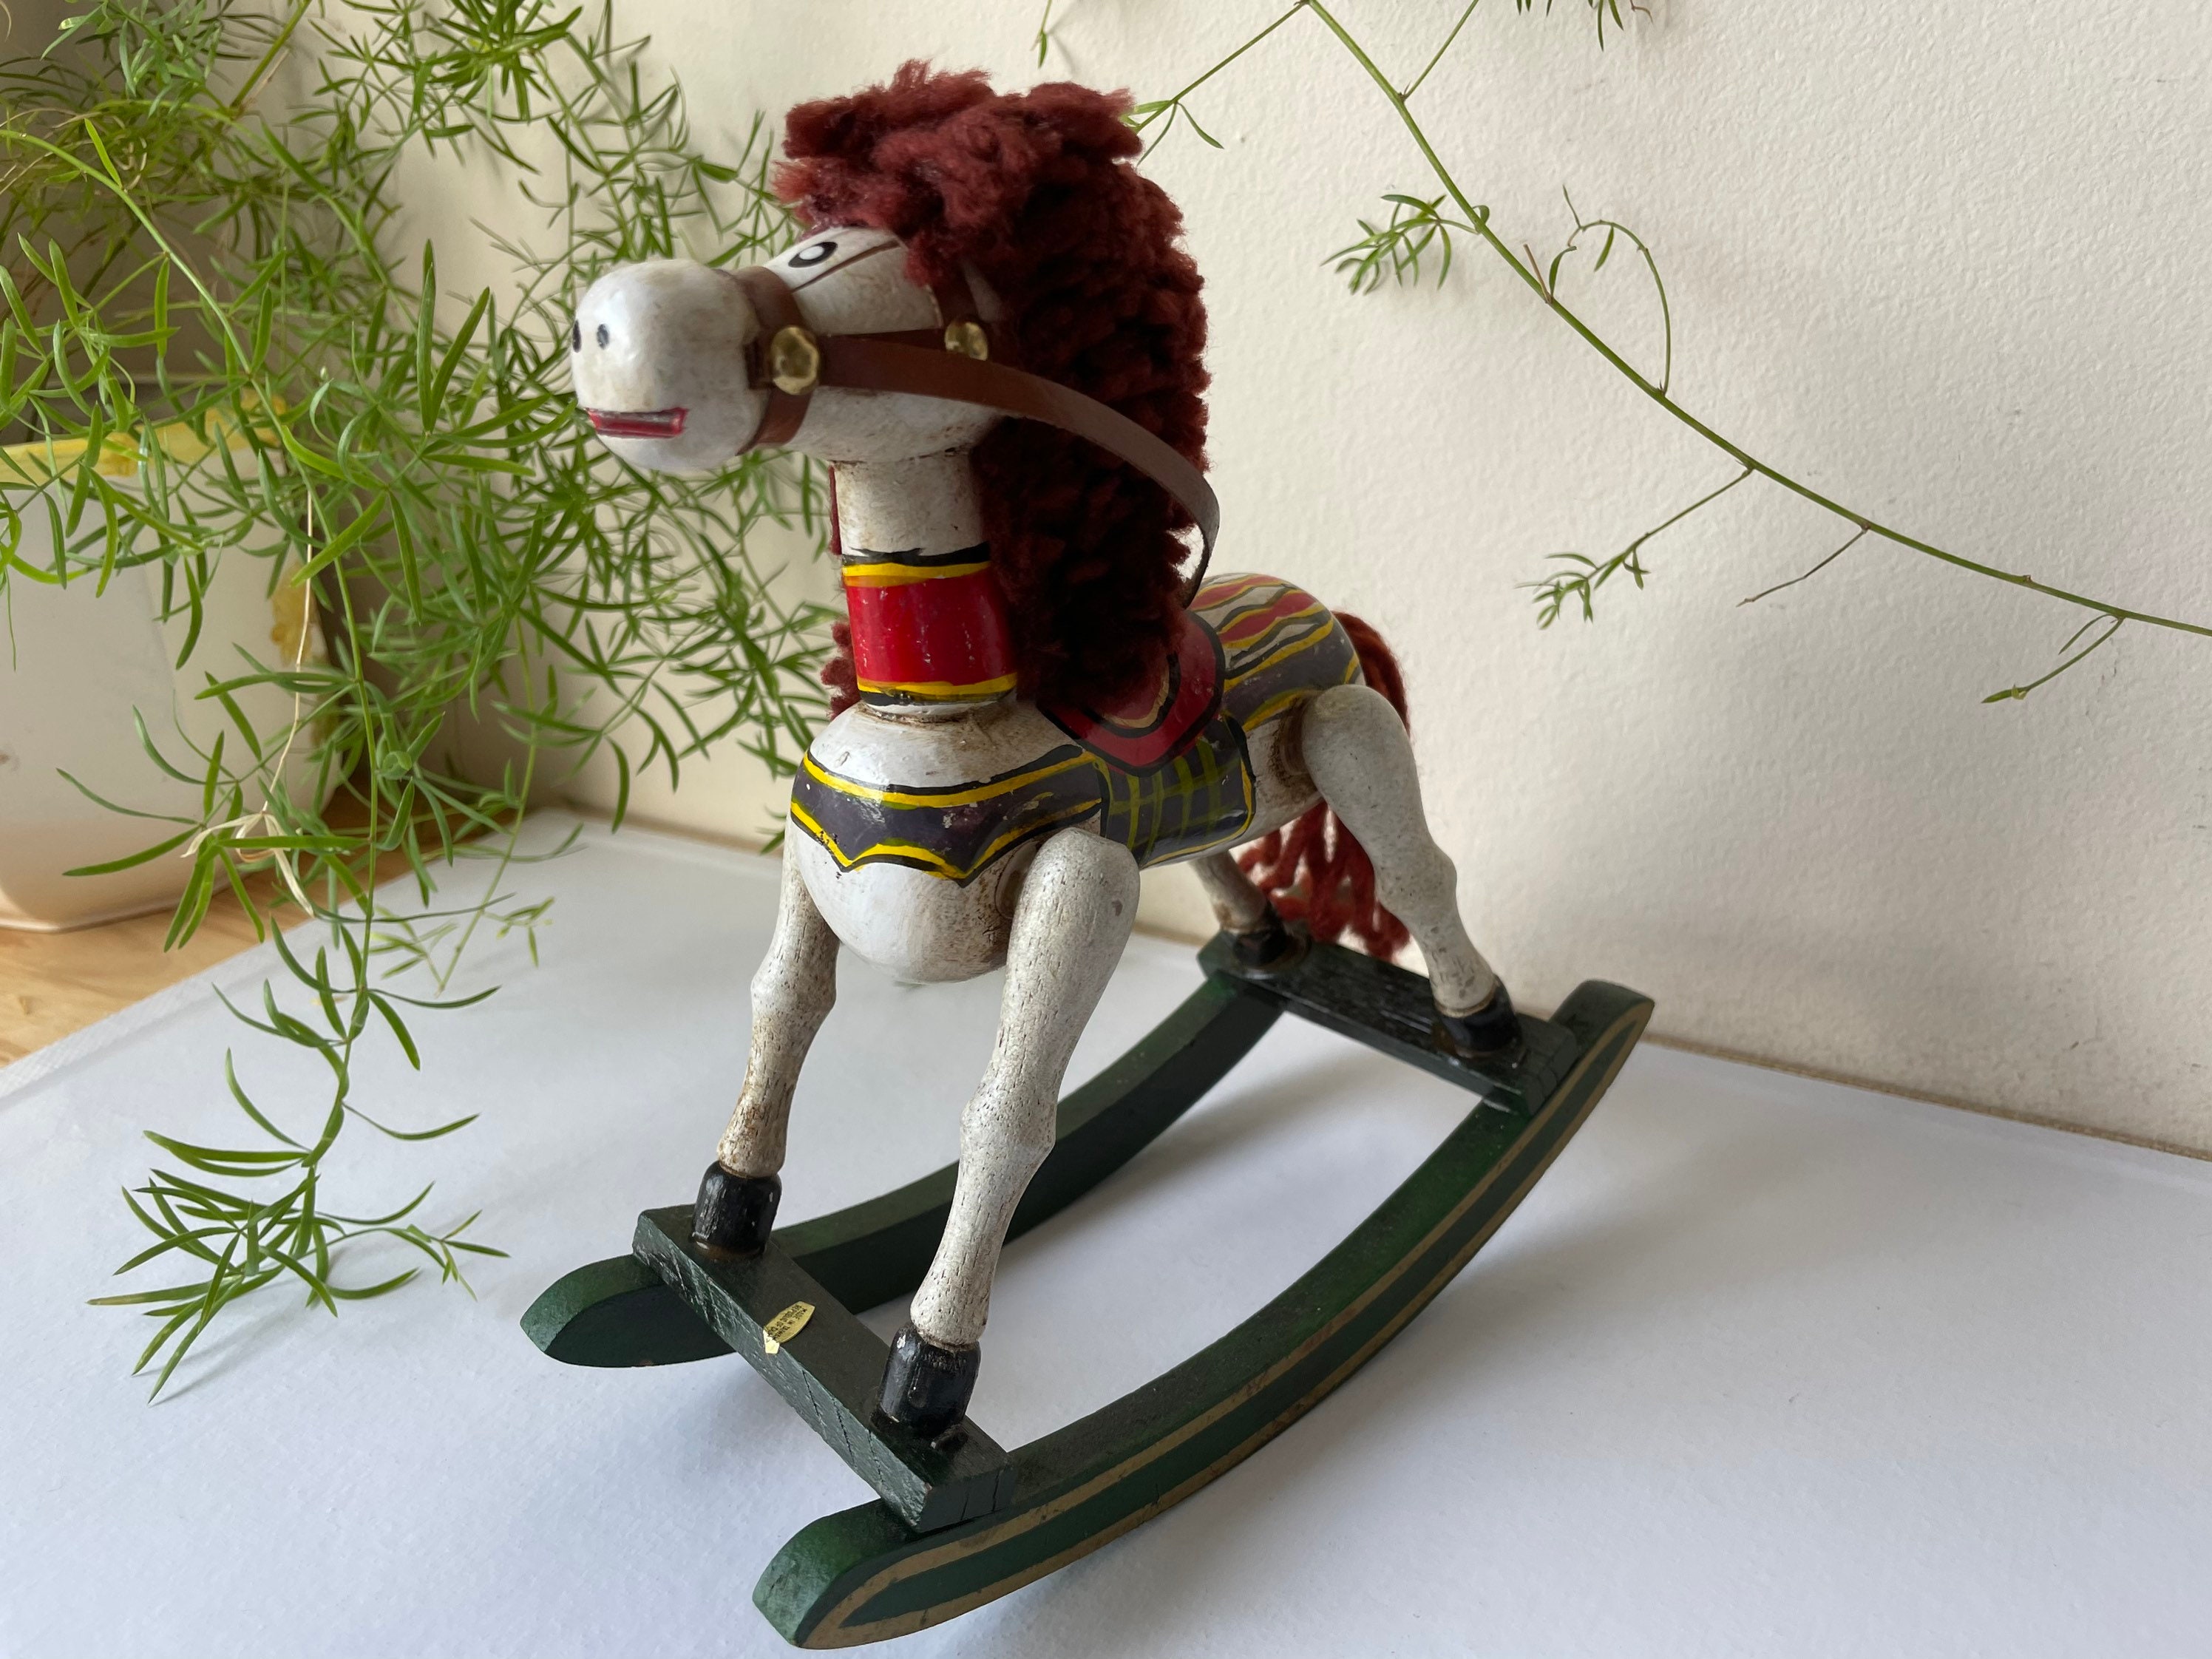 what does a rocking horse symbolize